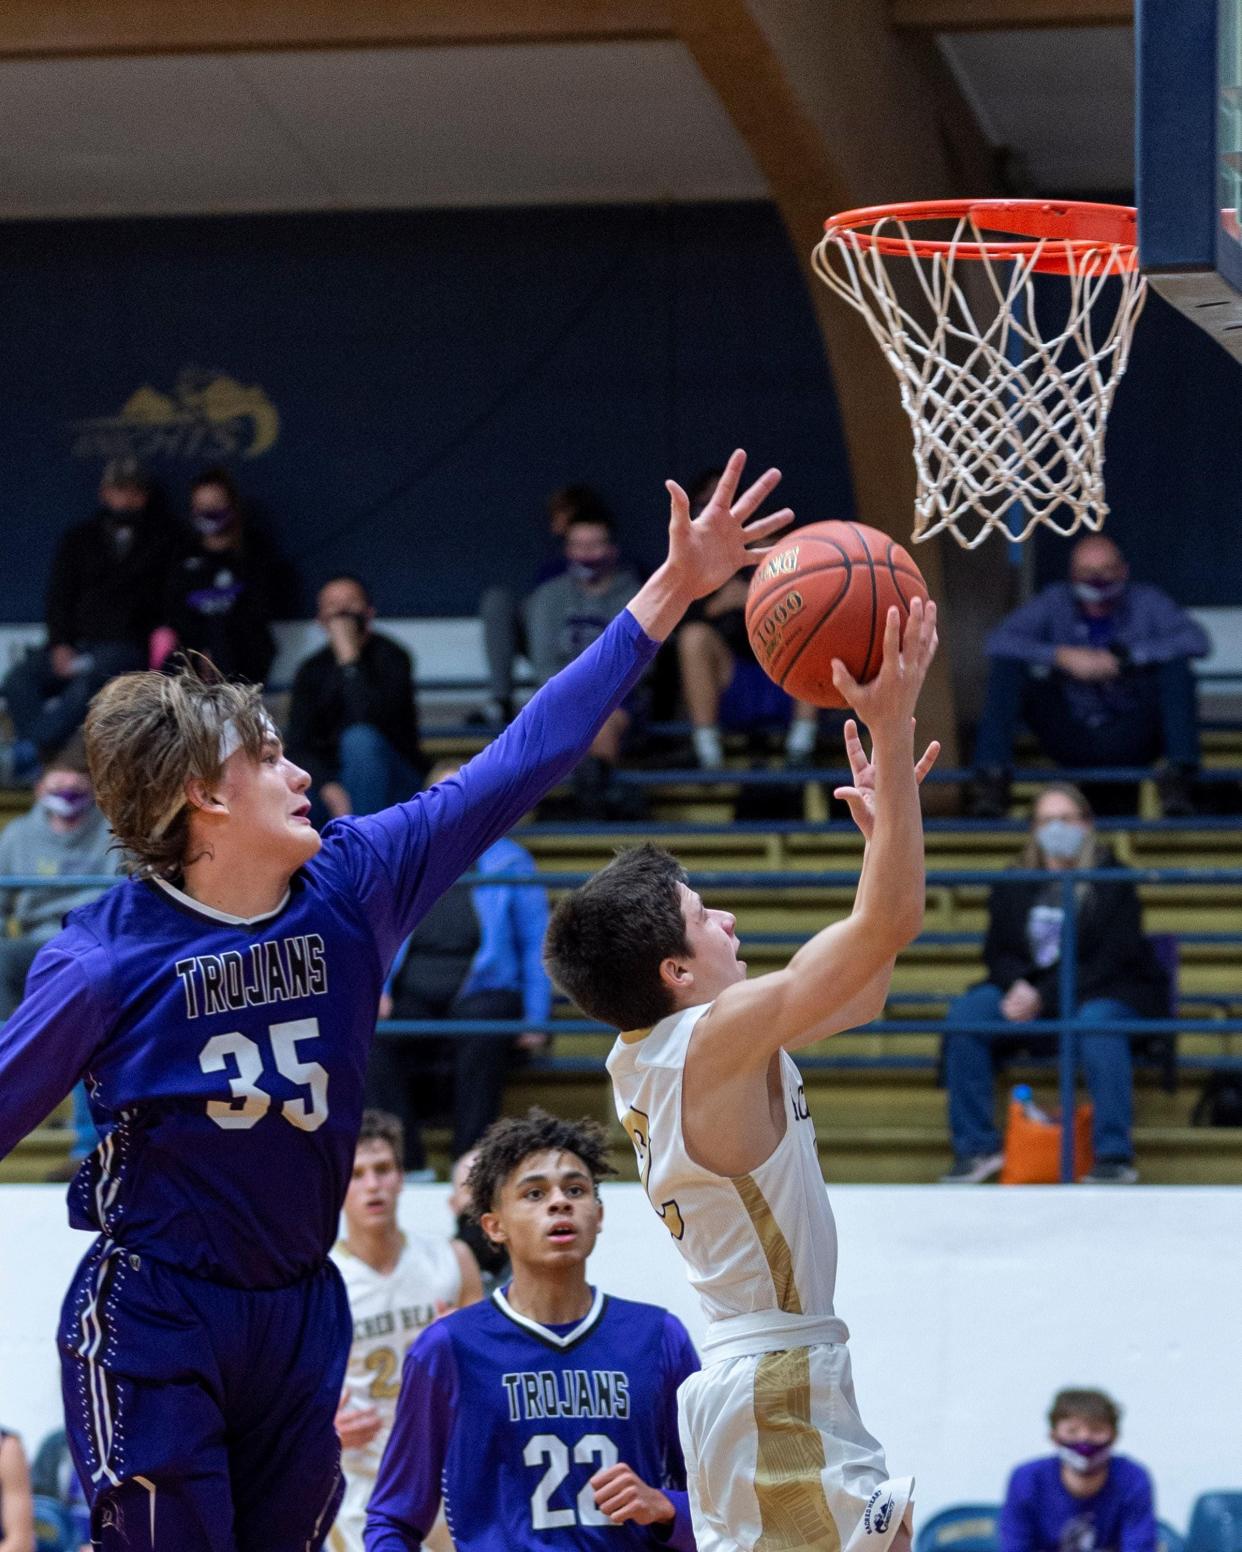 Southeast of Saline's Eli Sawyers (35) attempts to block a shot against Sacred Heart's Michael Matteucci (2) during their game in December 2020 at the Sacred Heart gym.